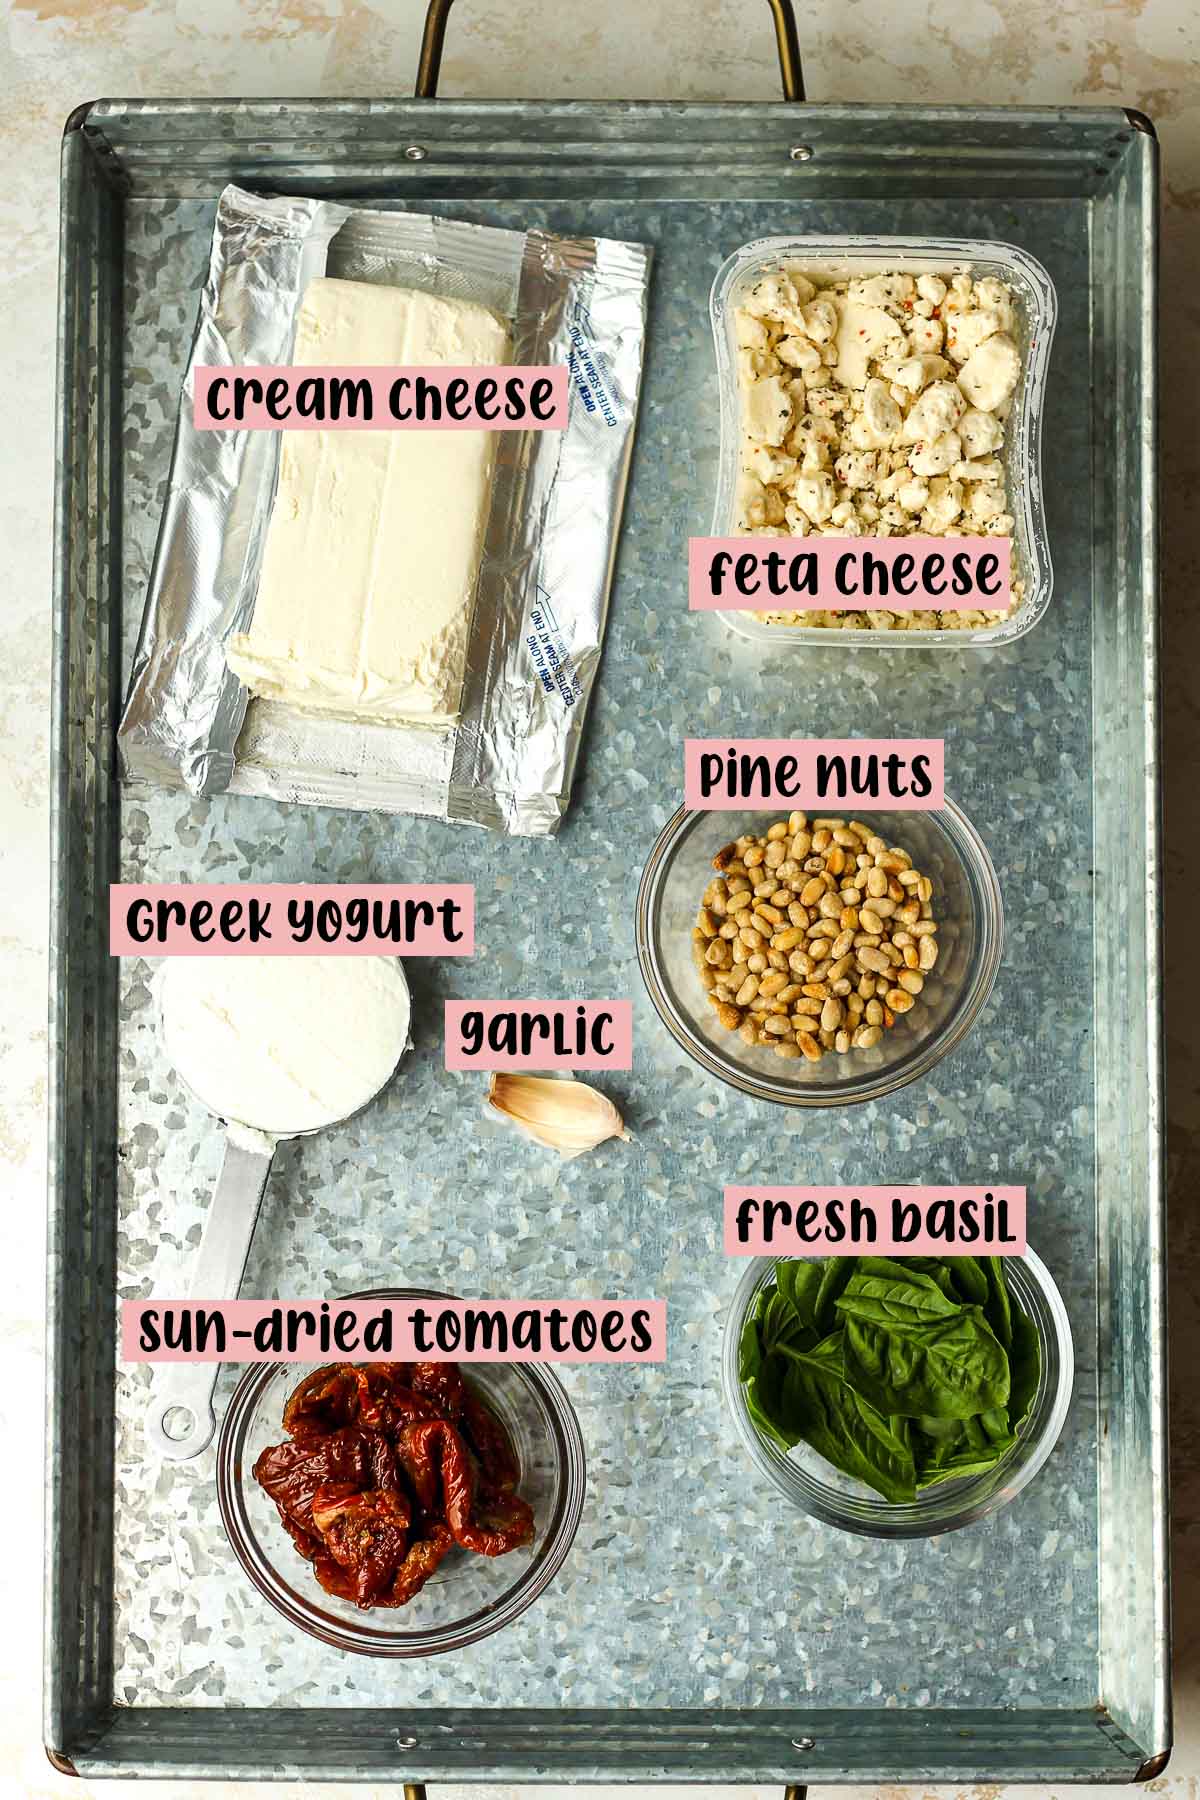 A tray of the labeled ingredients.